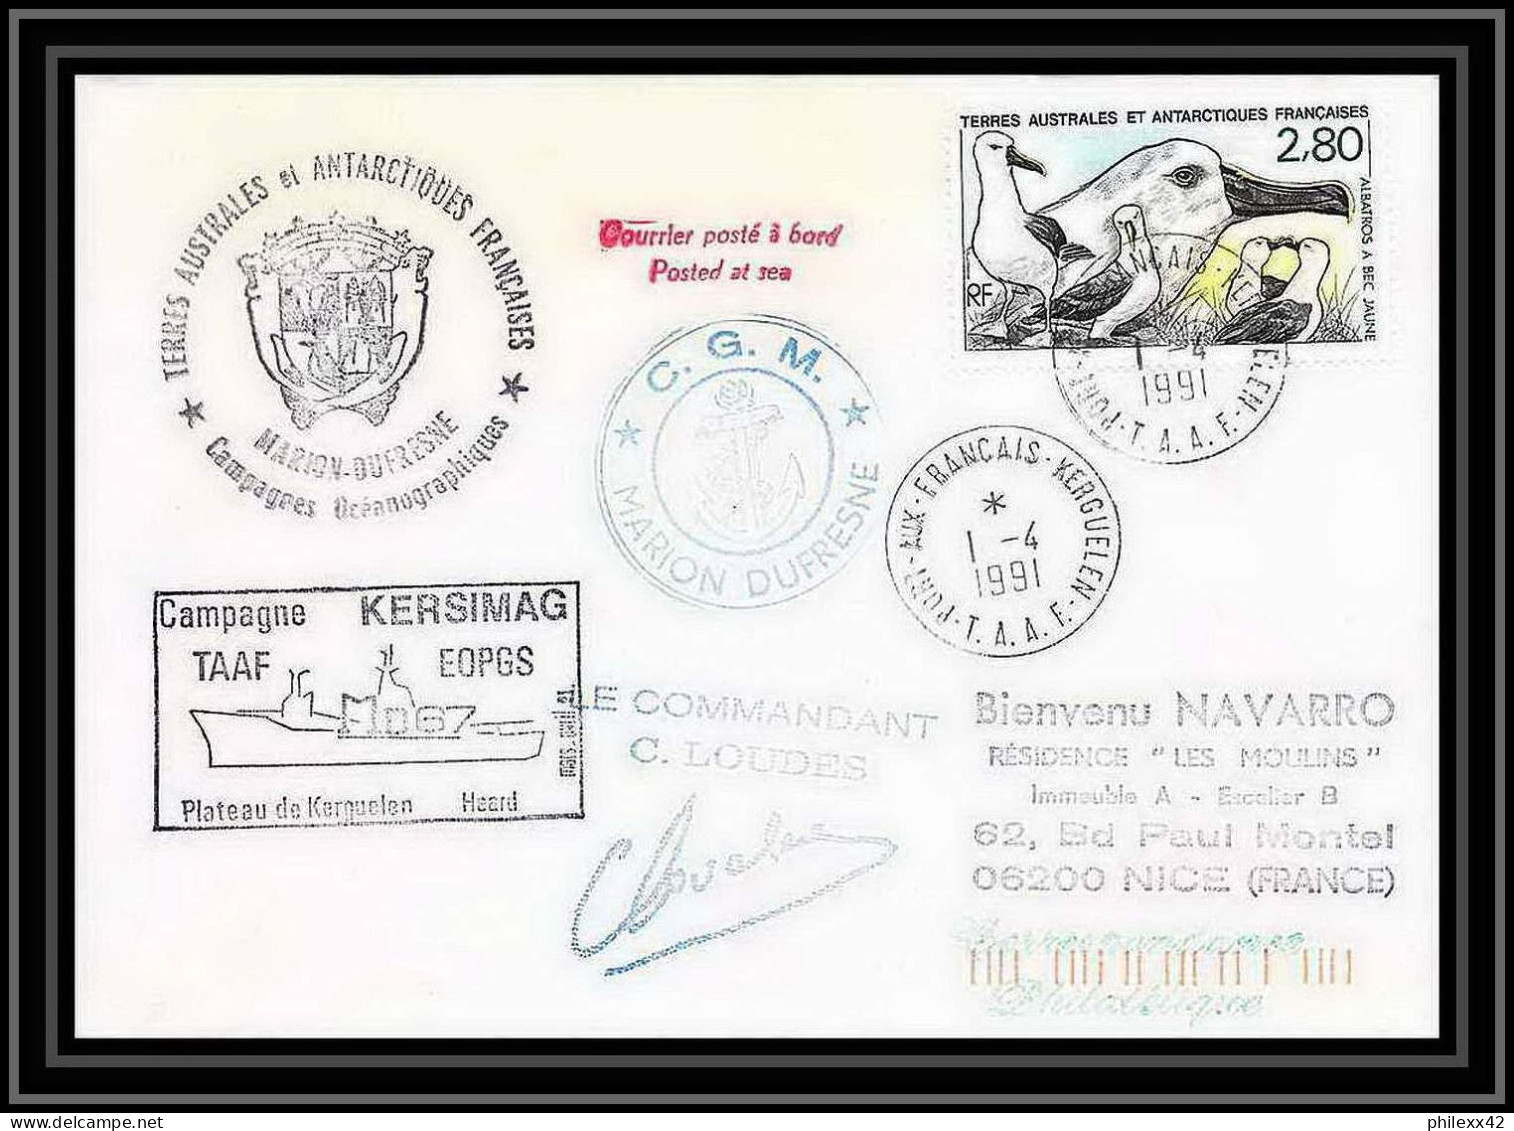 1739 Campagne Mersimag 1/4/1991 Signé Signed Loudes TAAF Antarctic Terres Australes Lettre (cover) - Antarctic Expeditions